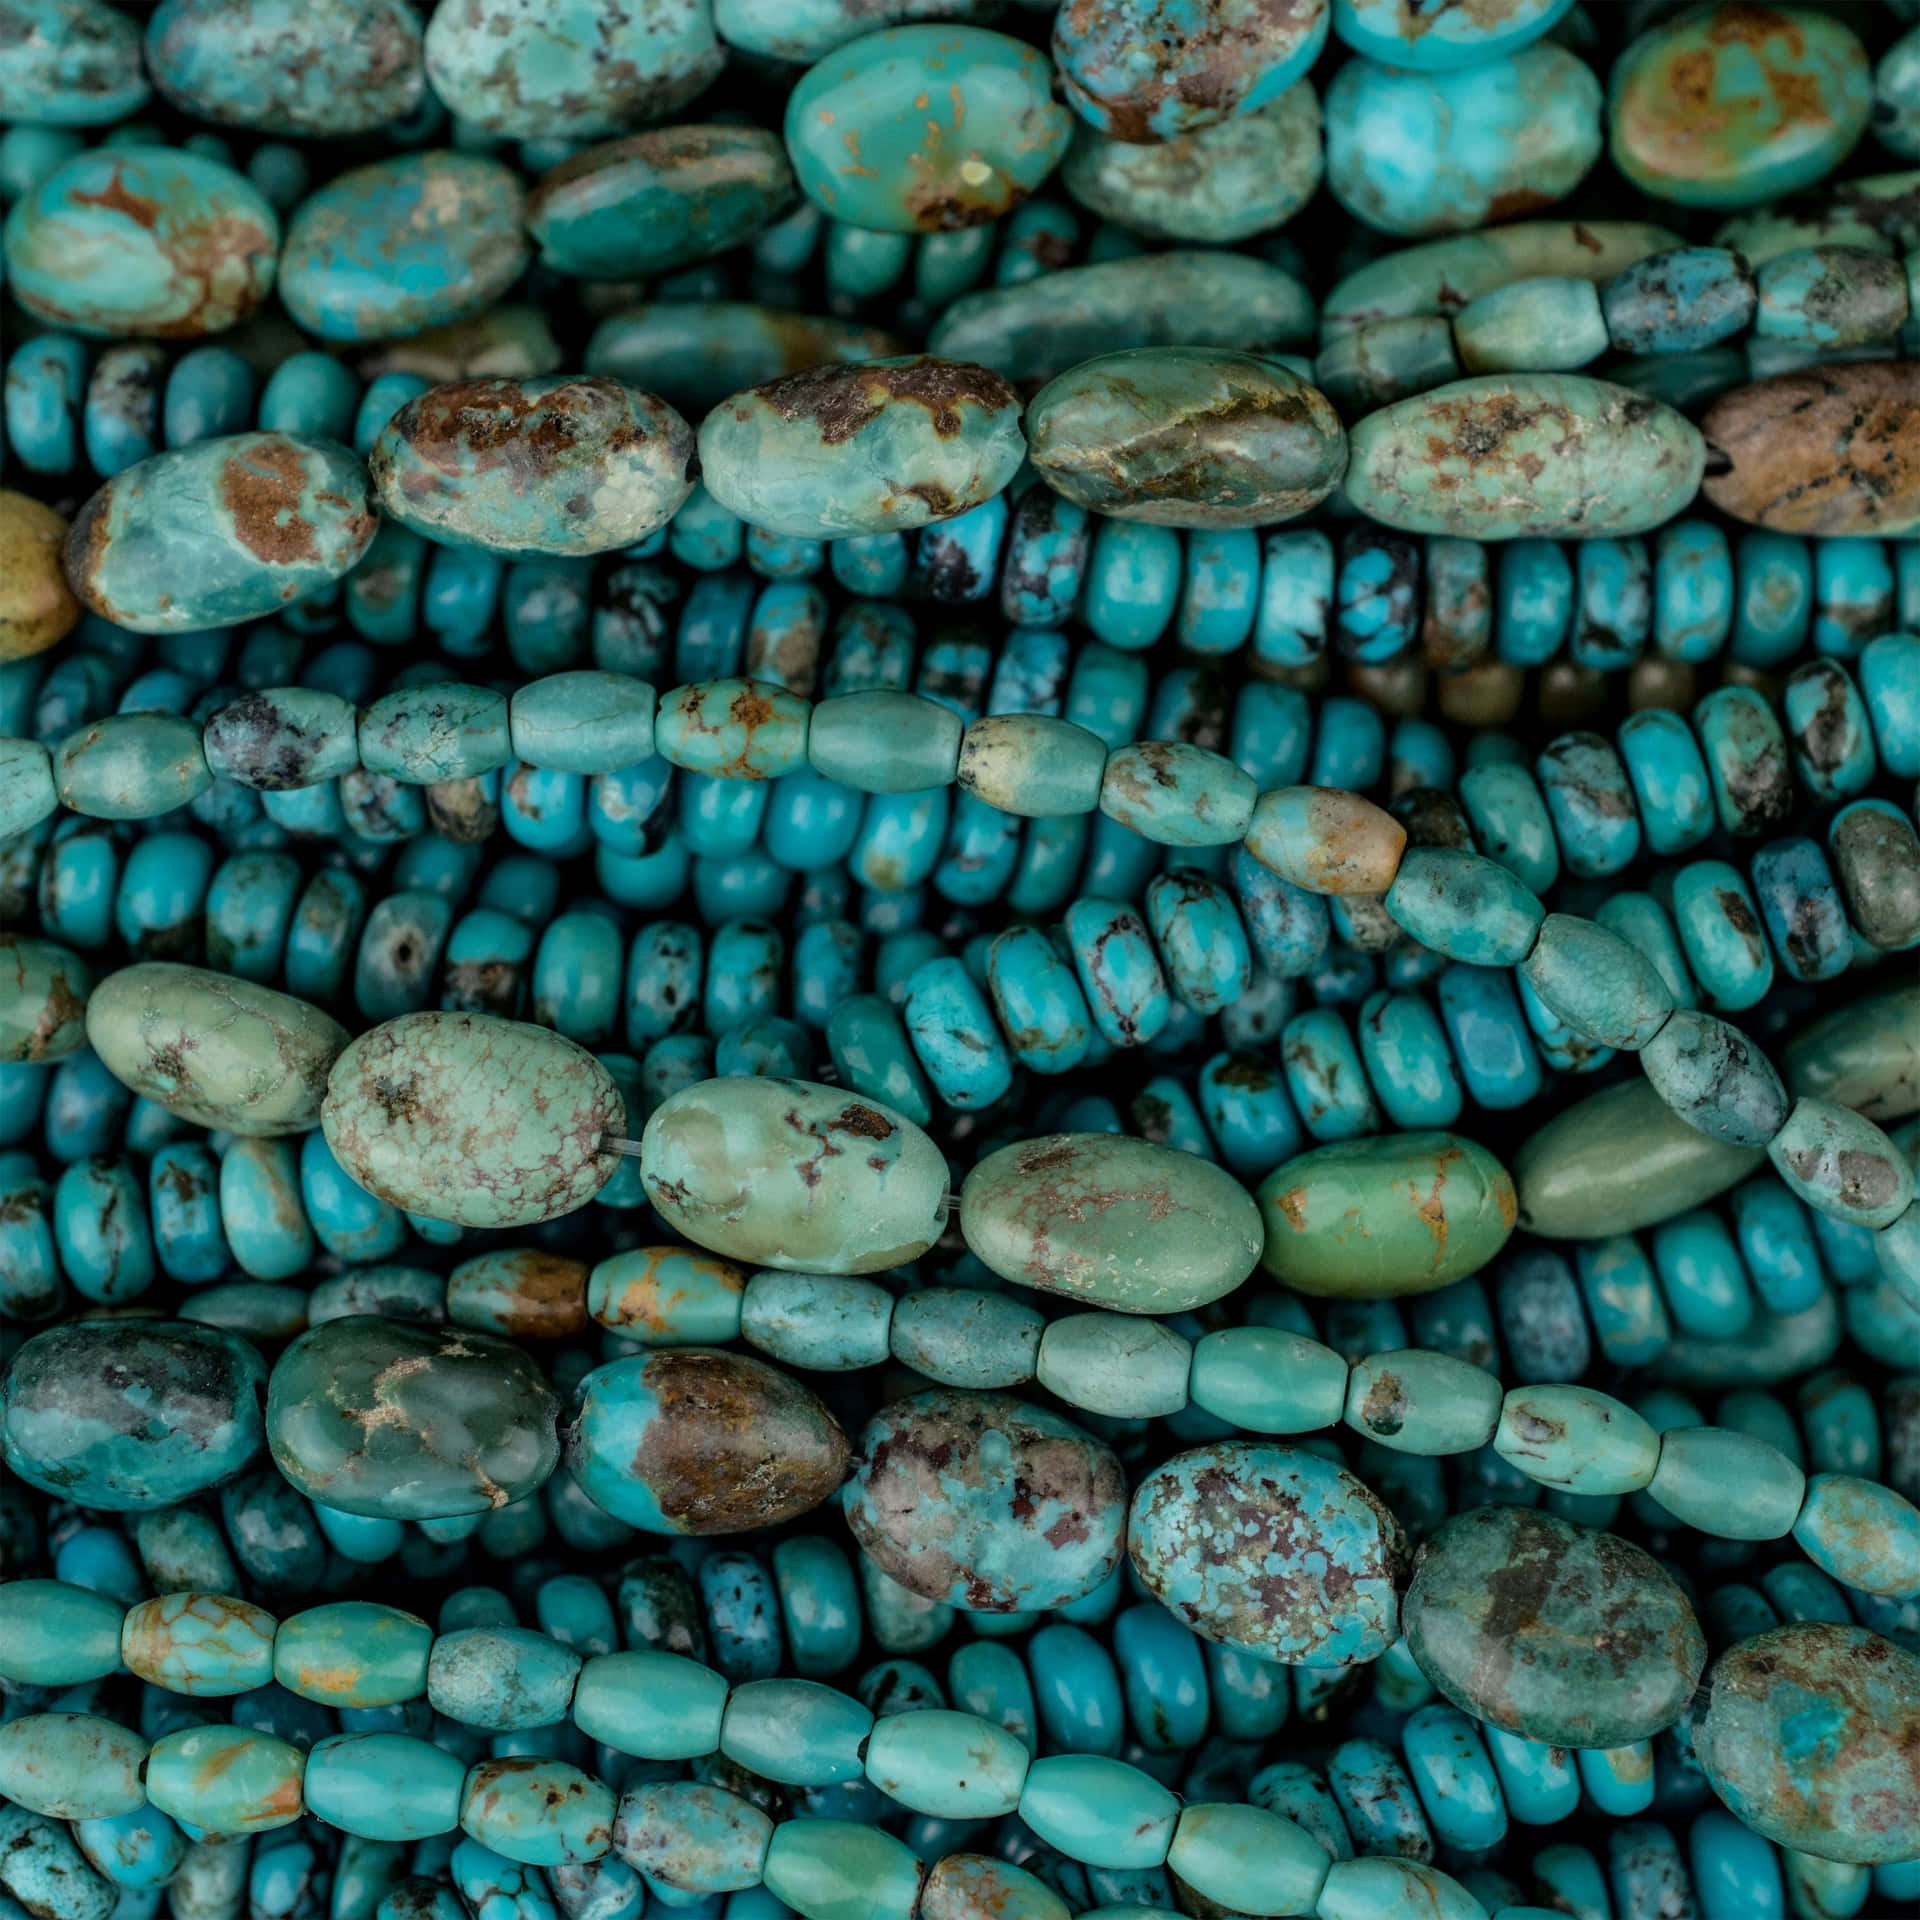 Turquoise Beads In A Pile